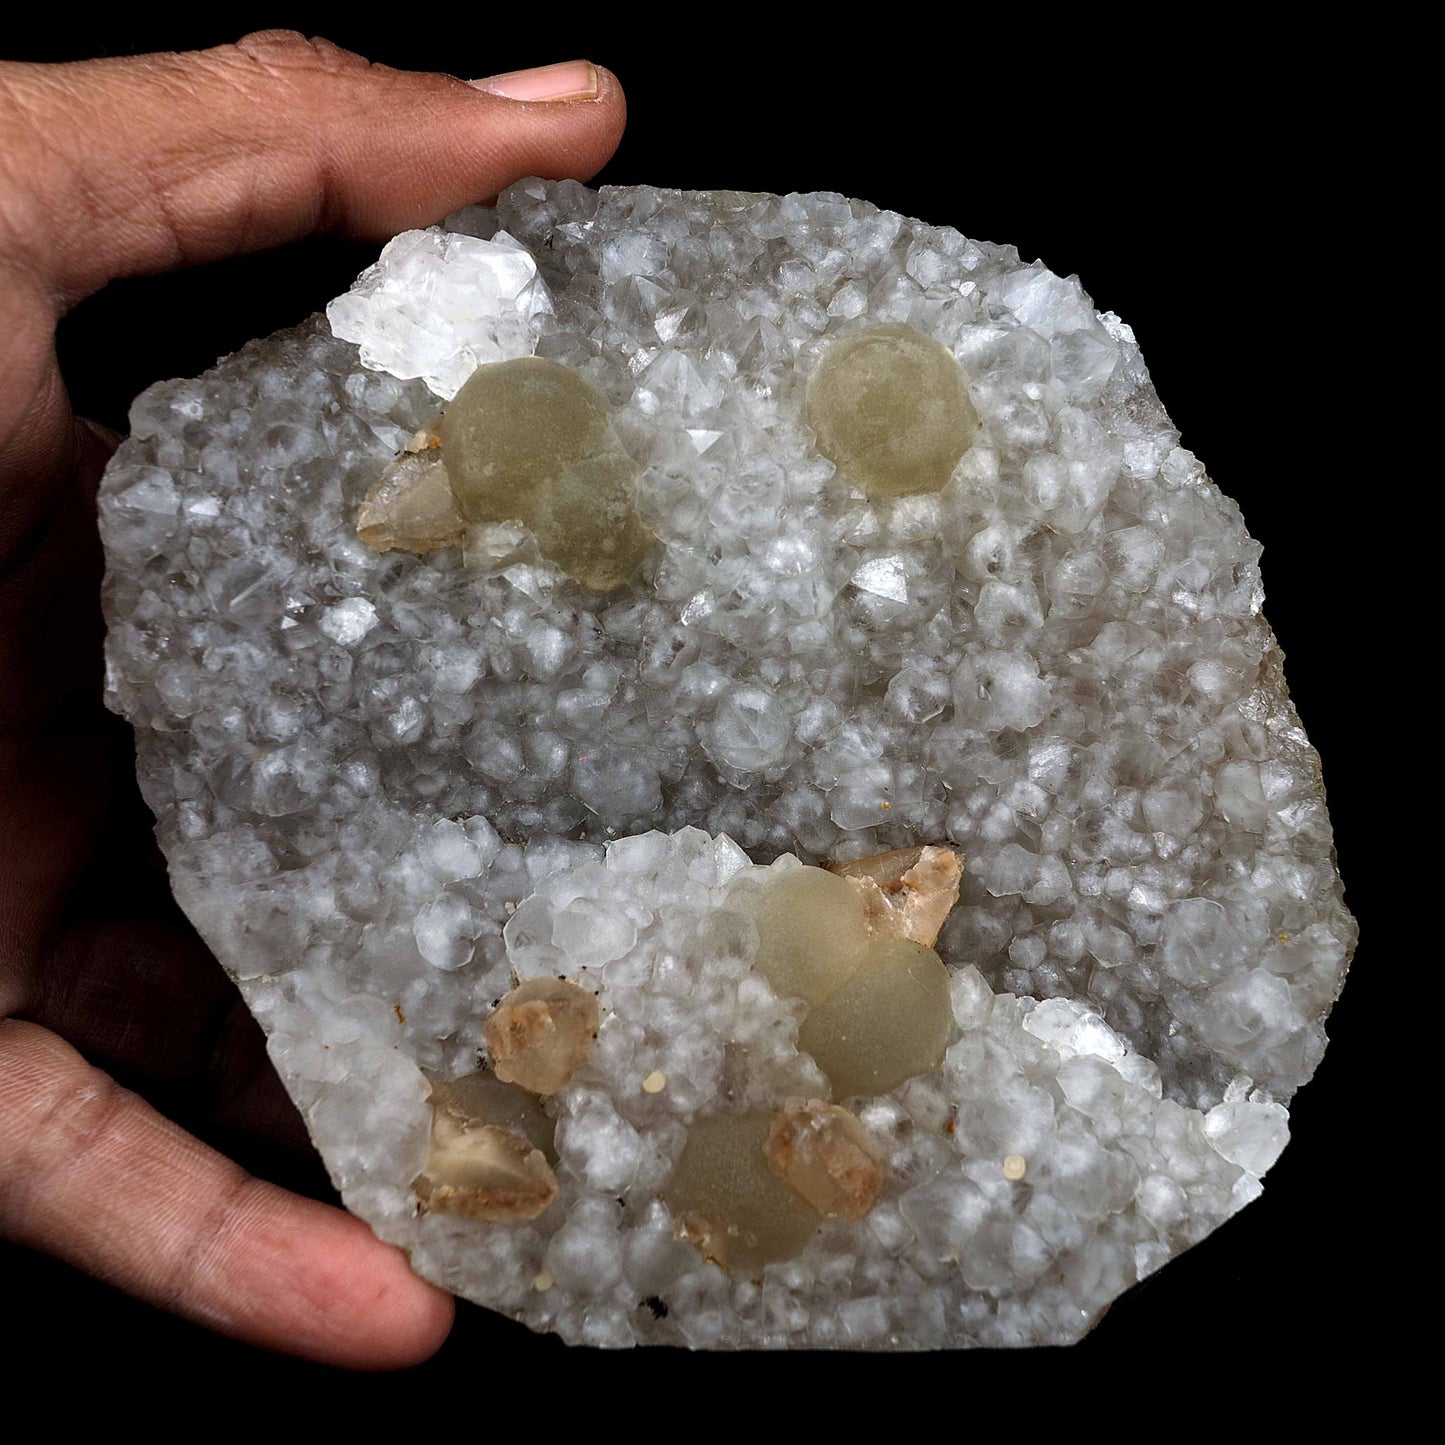 Fluorite Botryoidal on MM Quartz Natural Mineral Specimen # B 3974  https://www.superbminerals.us/products/fluorite-botryoidal-on-mm-quartz-natural-mineral-specimen-b-3974  Features A small scale example of translucent Quartz facilitating an ideal side of the equator of yellow Fluorites. Yellow Fluorites circles are more diligently to discover, and this one is tantamount to they get for the size. Primary Mineral(s):&nbsp; Fluorite Secondary Mineral(s): MM QuartzMatrix: N/A11 cm x 12 cm755